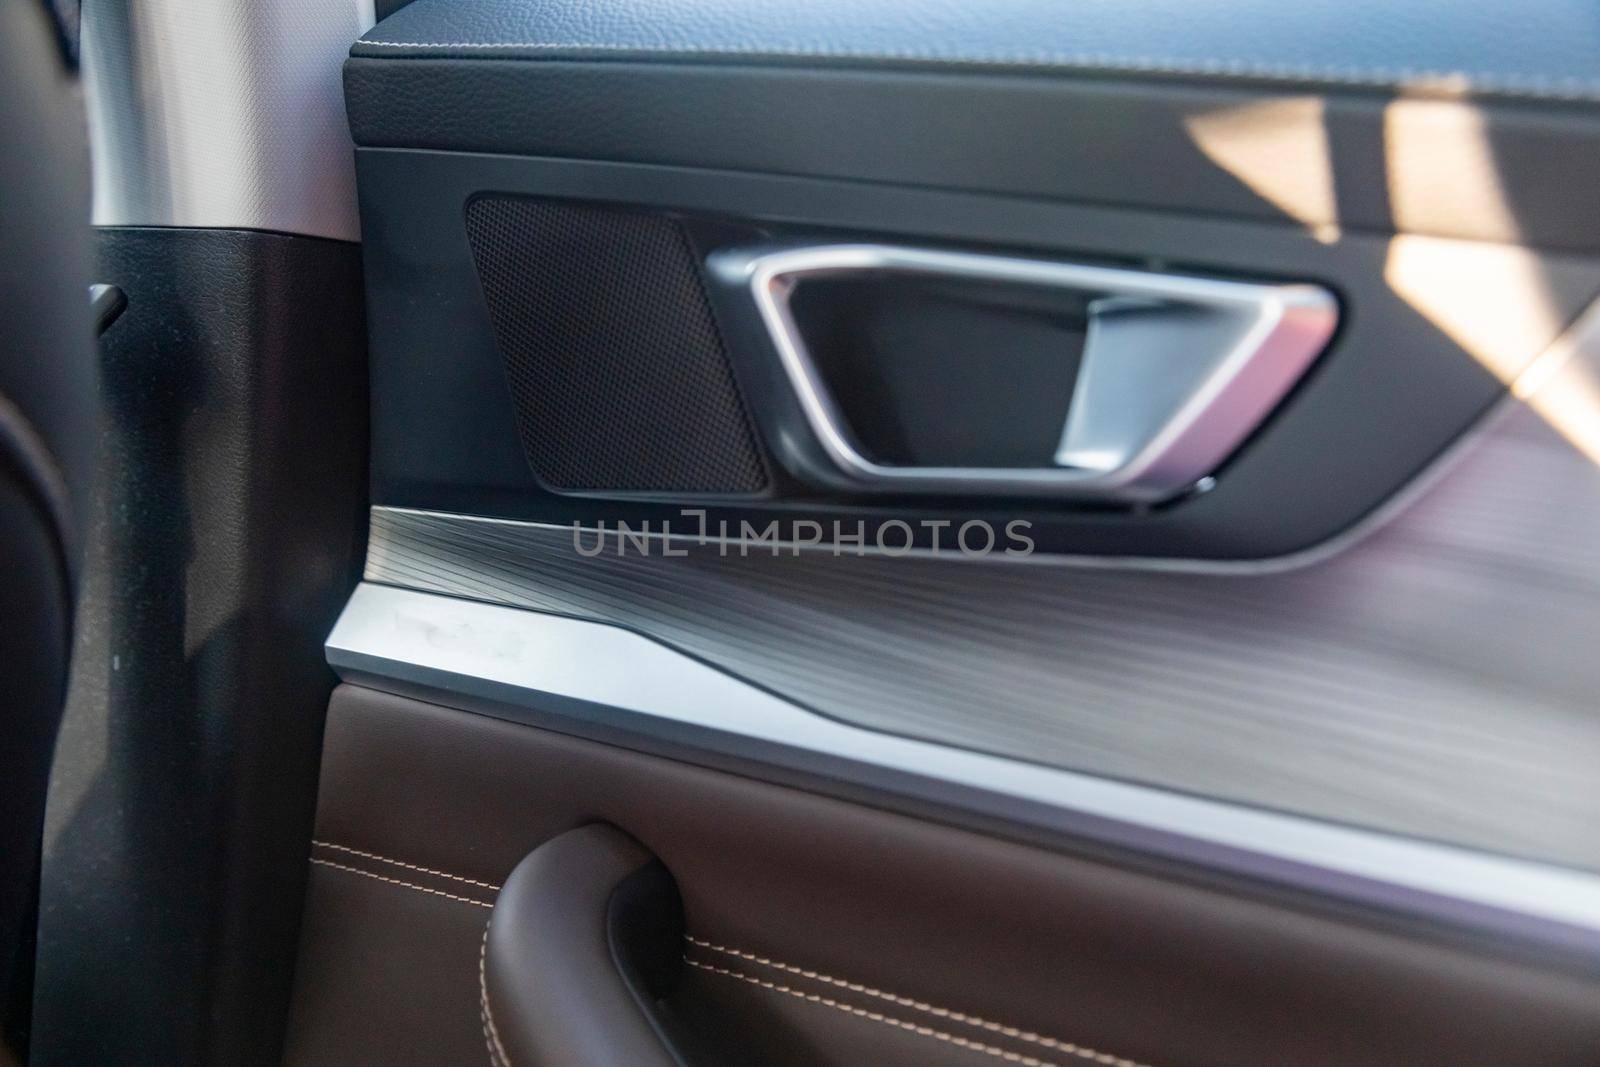 interior door handle of a modern premium car close-up side view